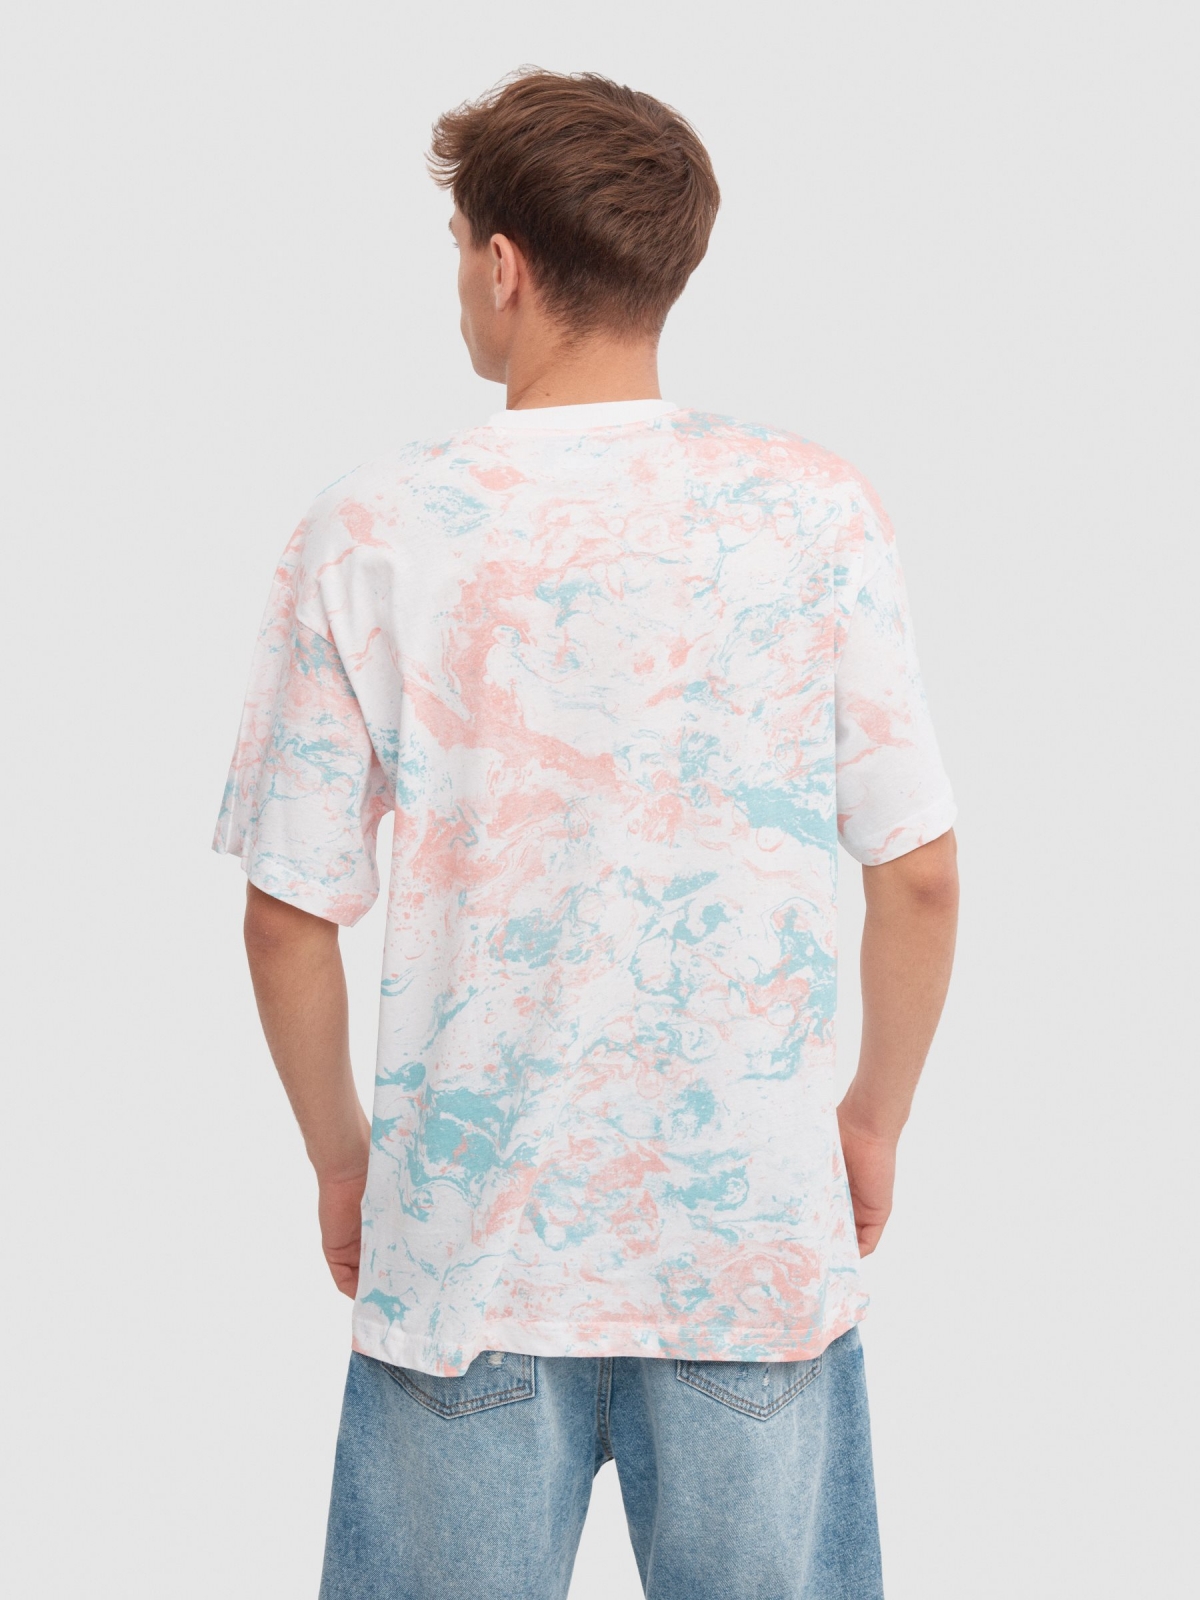 Marbled T-shirt white middle back view